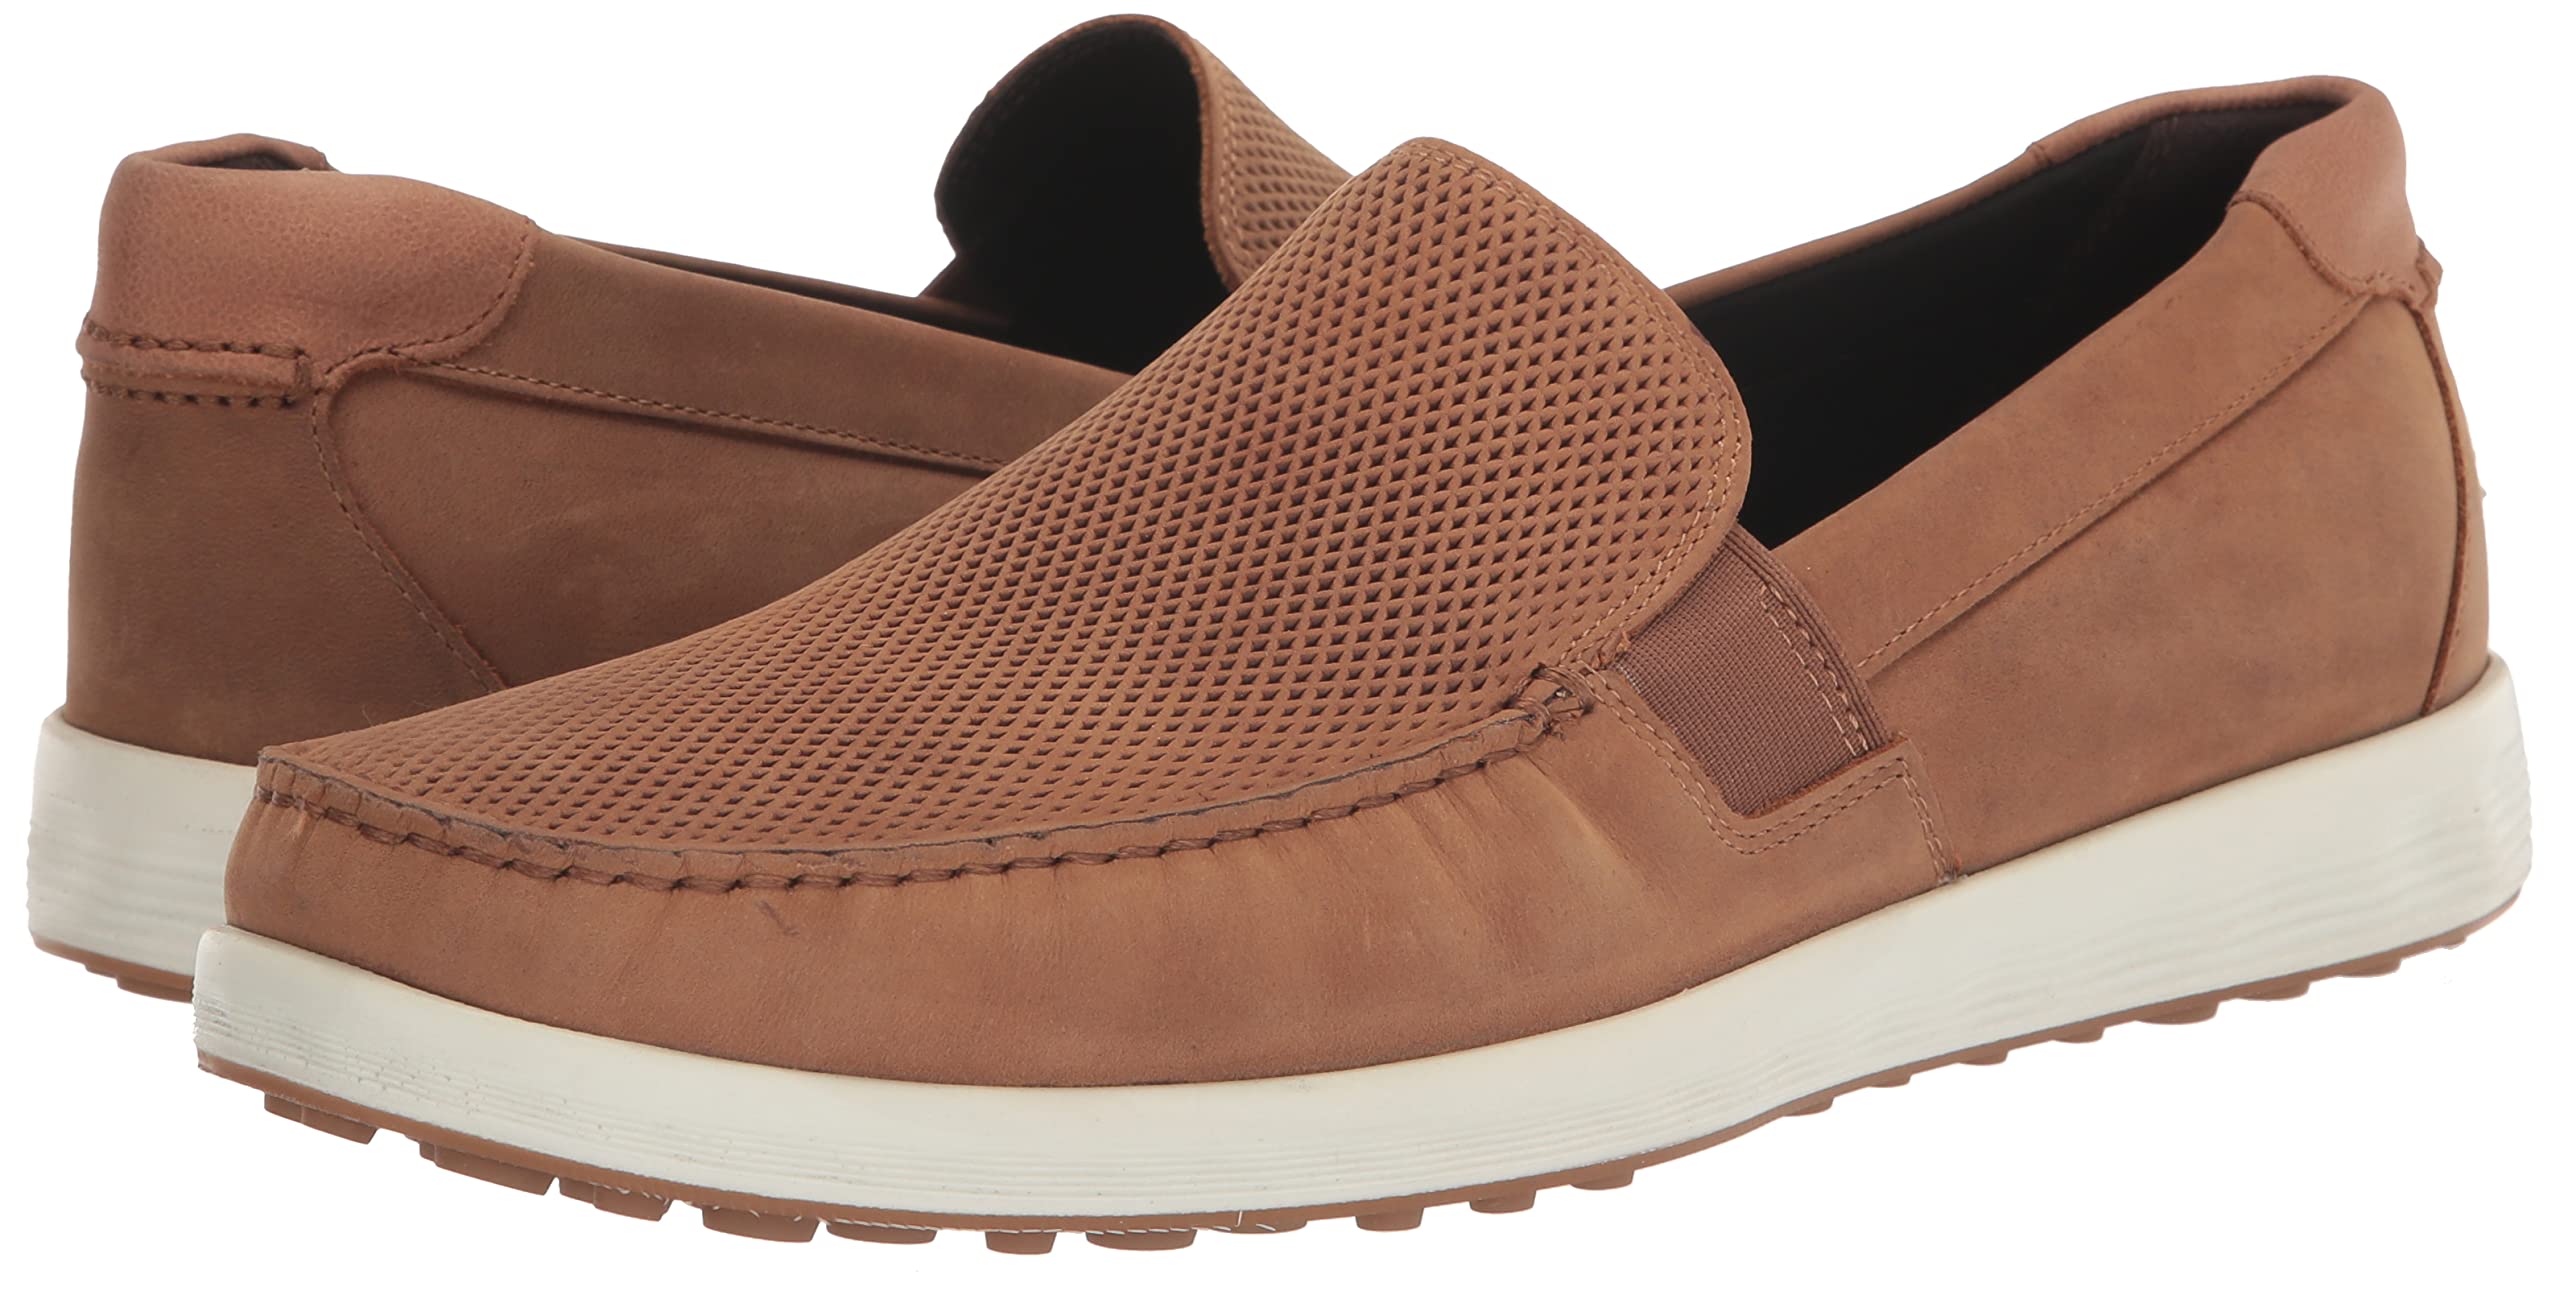 ECCO Men's S Lite Moc Summer Driving Style Loafer